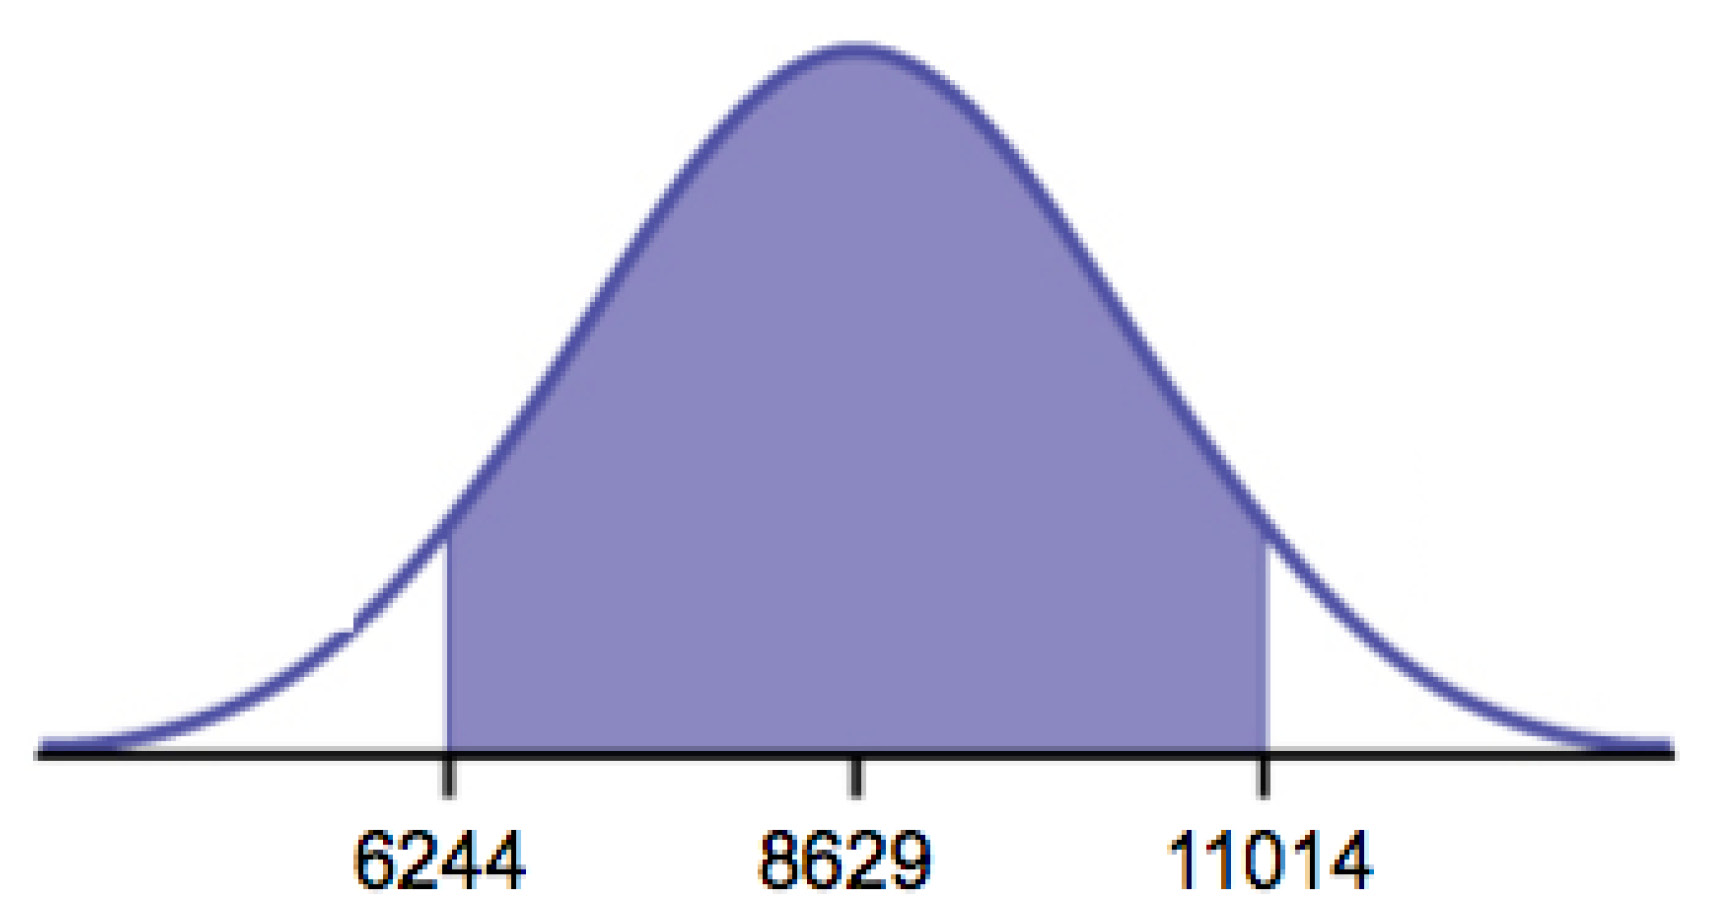 Normal distribution curve with two vertical upward lines from the x-axis to the curve. The area between these lines and under the curve is shaded. The left line has value 6244, the mean has value 8629, and the right line has value 11014.